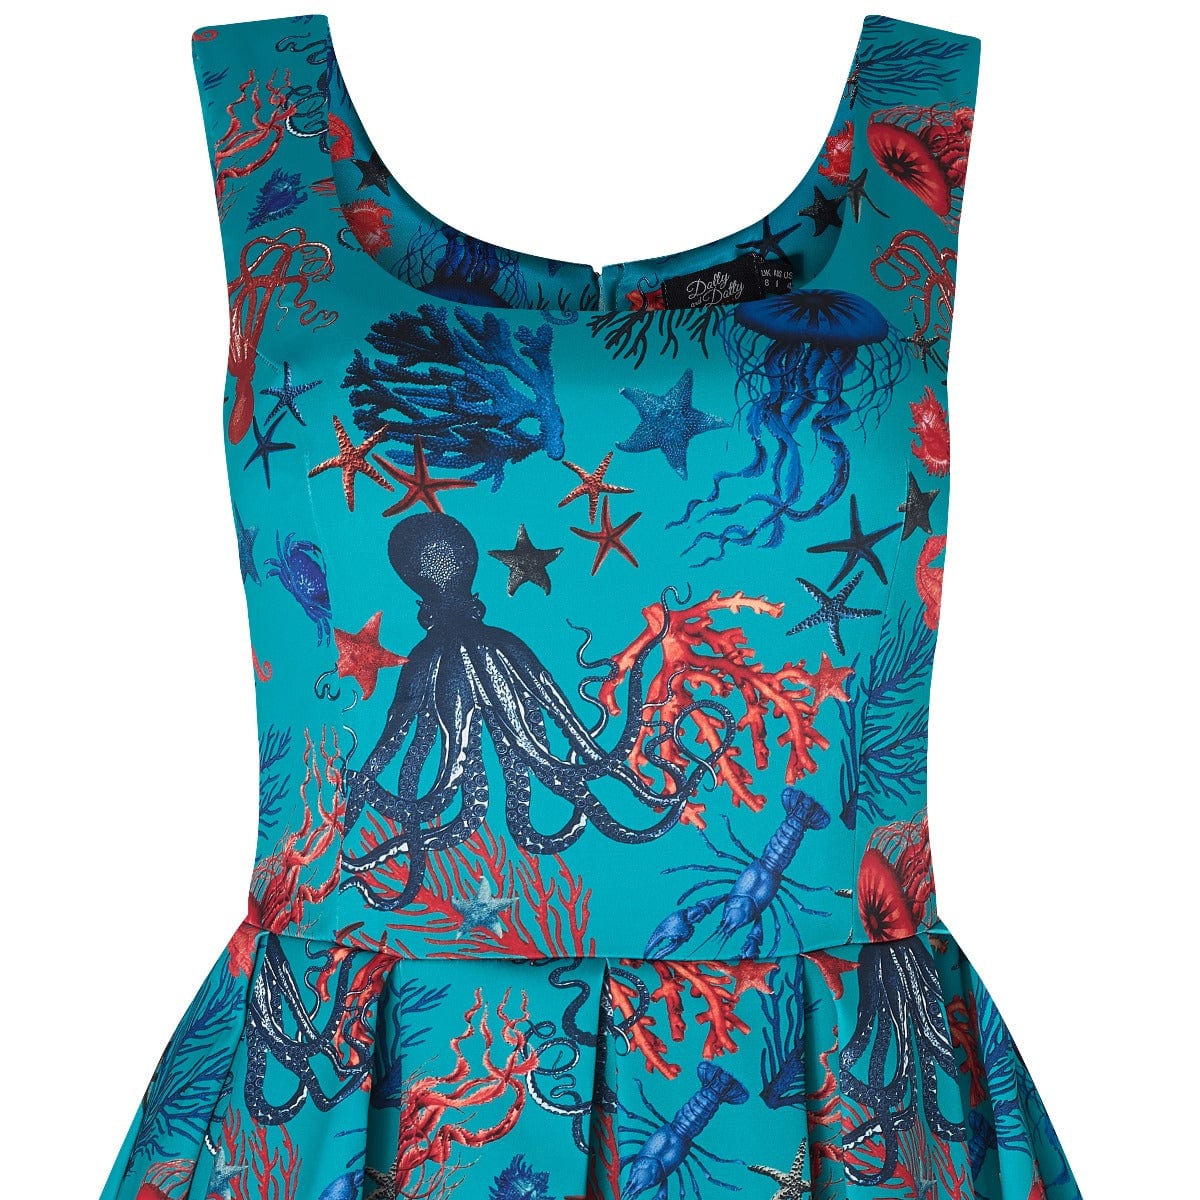 Amanda flared dress, in sea blue, with blue and red octopus, squid and jellyfish print, close up view